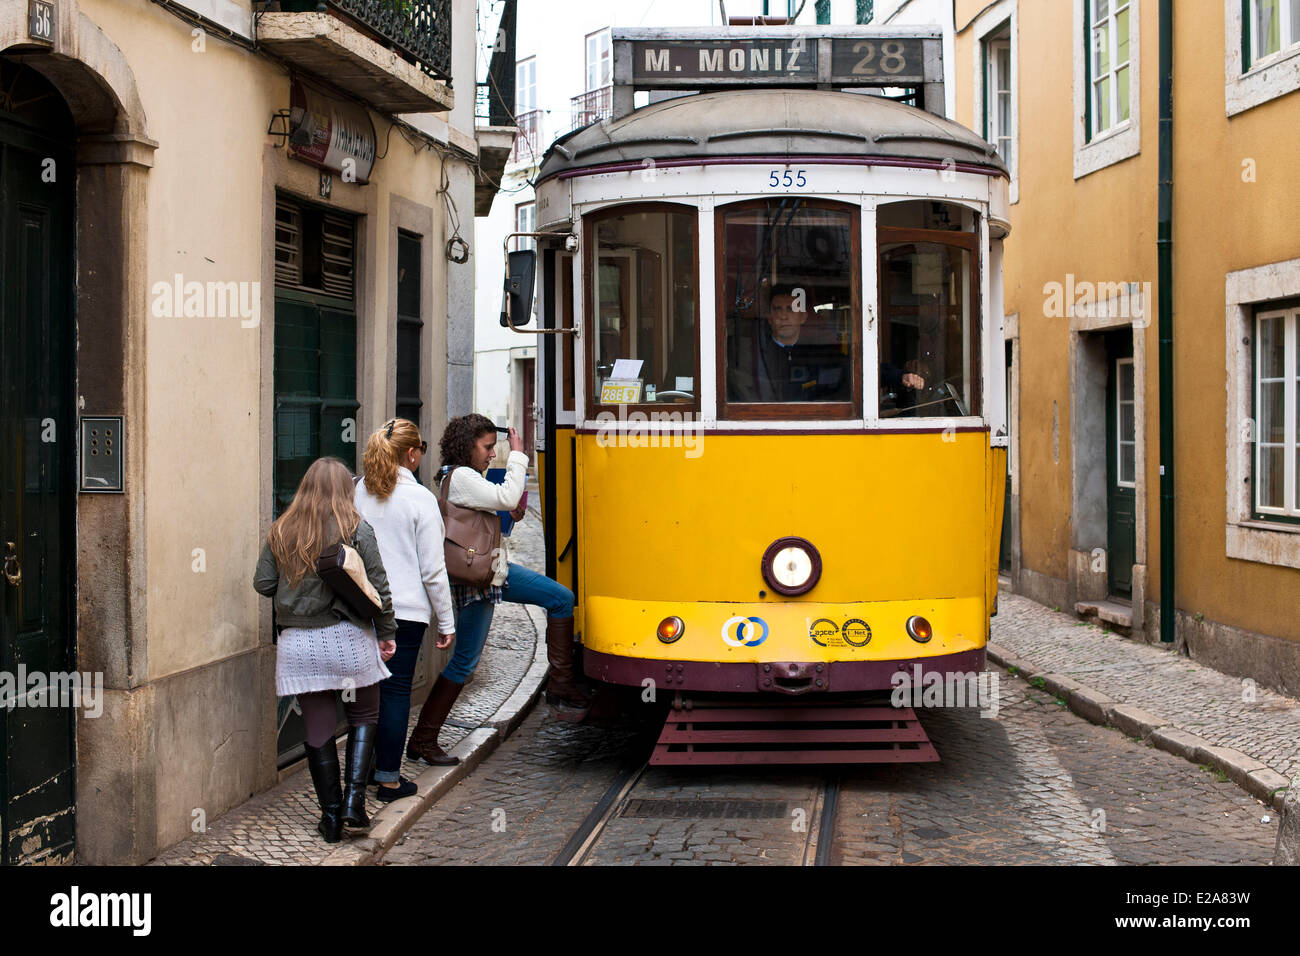 Portugal, Lisbon, the tramway is the most convenient means of transport Stock Photo